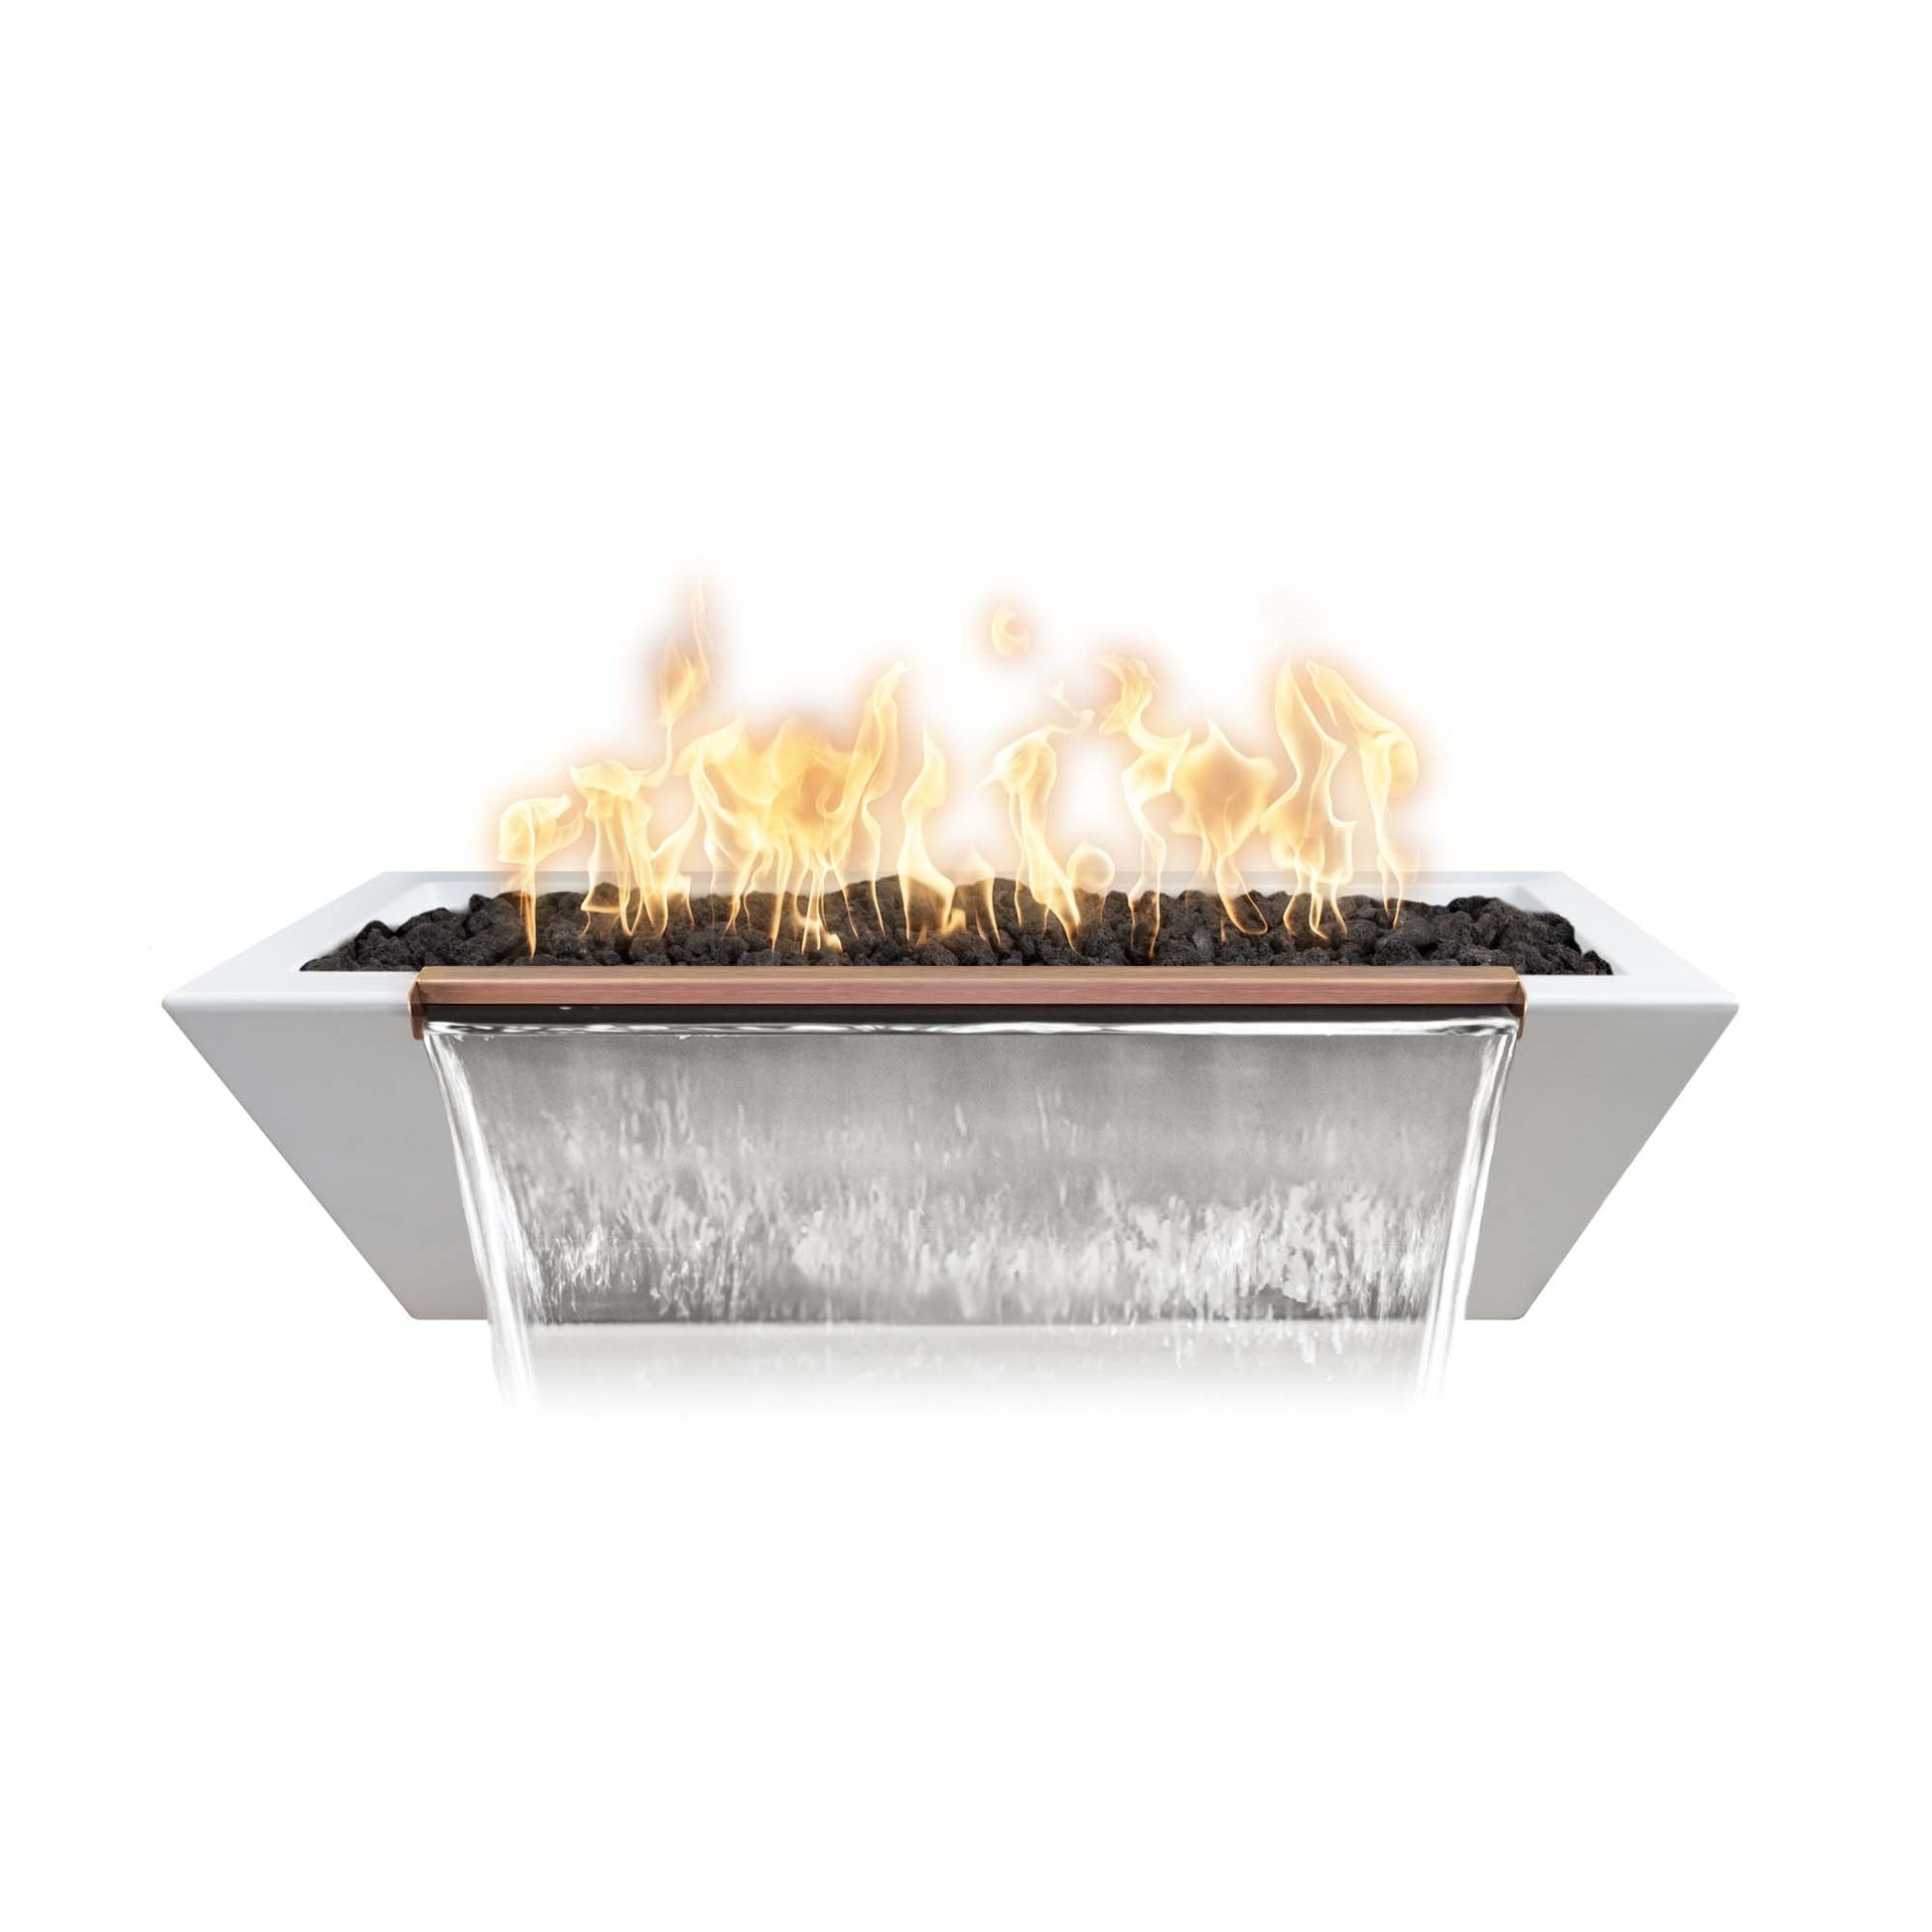 The Outdoor Plus Linear Maya 60" Rustic Gray GFRC Concrete Liquid Propane Fire & Water Bowl with 12V Electronic Ignition